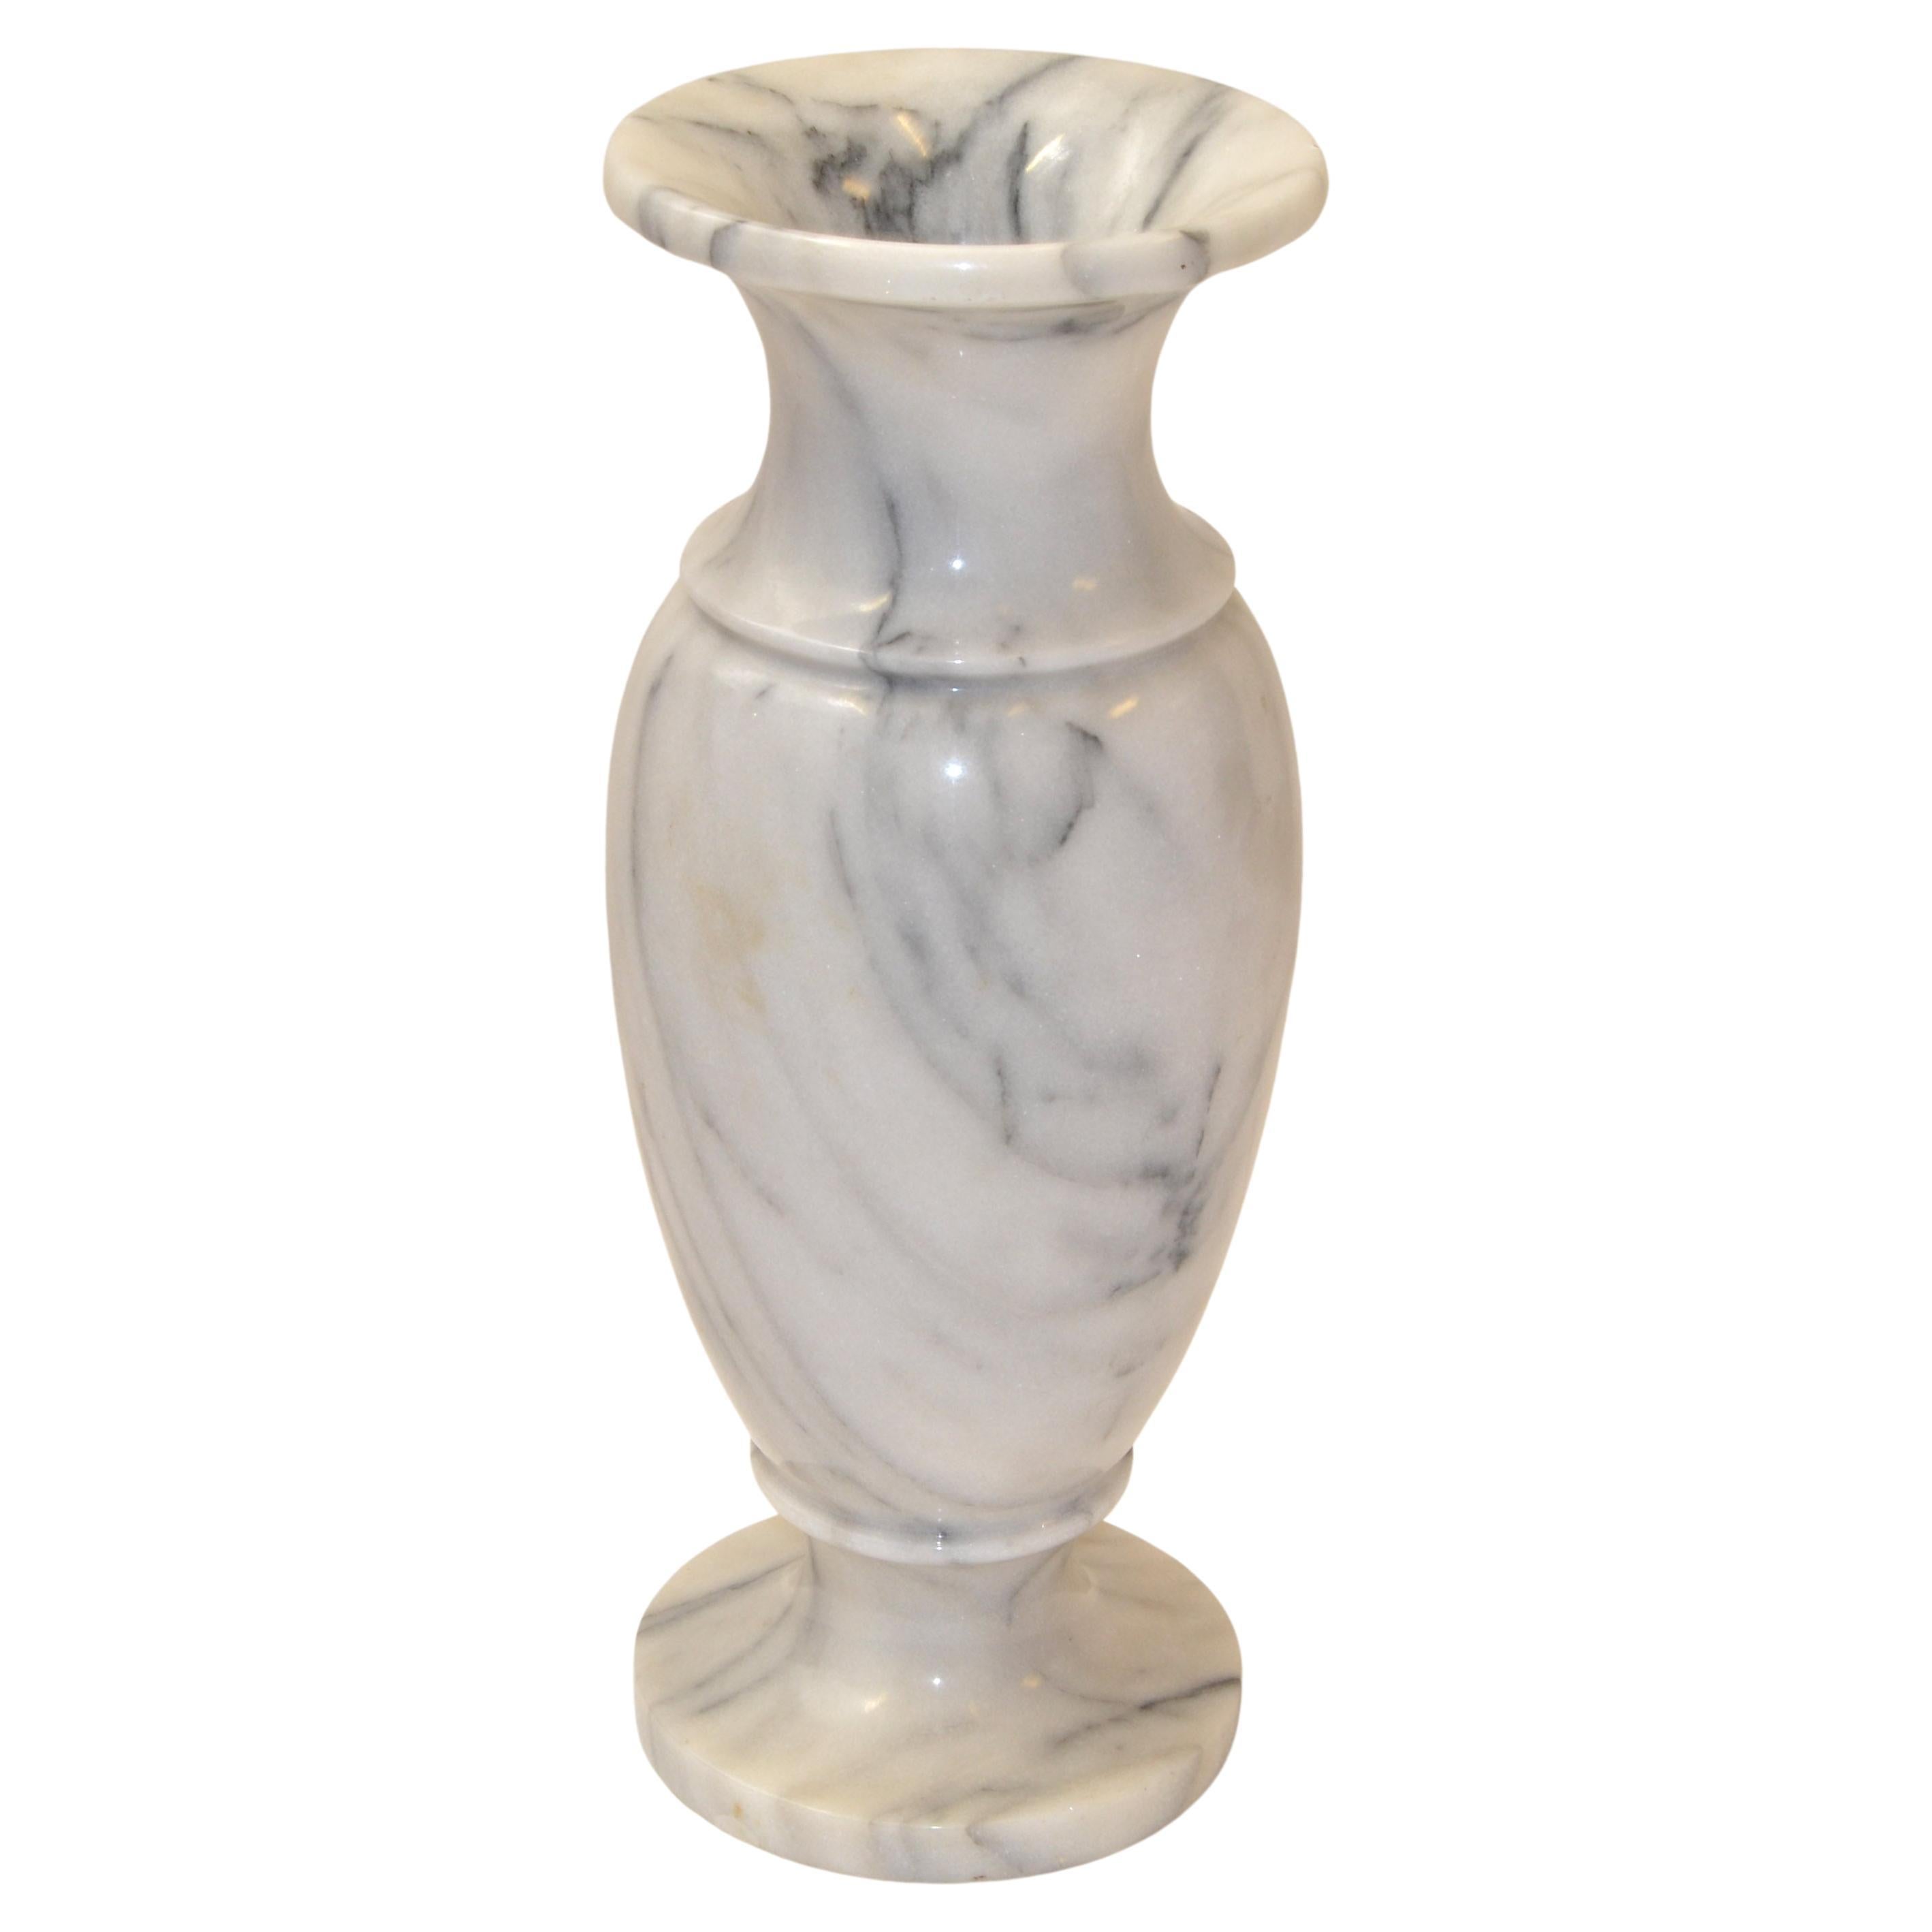 Art Deco Style 20th Century Hand Carved Carrara Marble Vase Urn Vessel, Italy For Sale